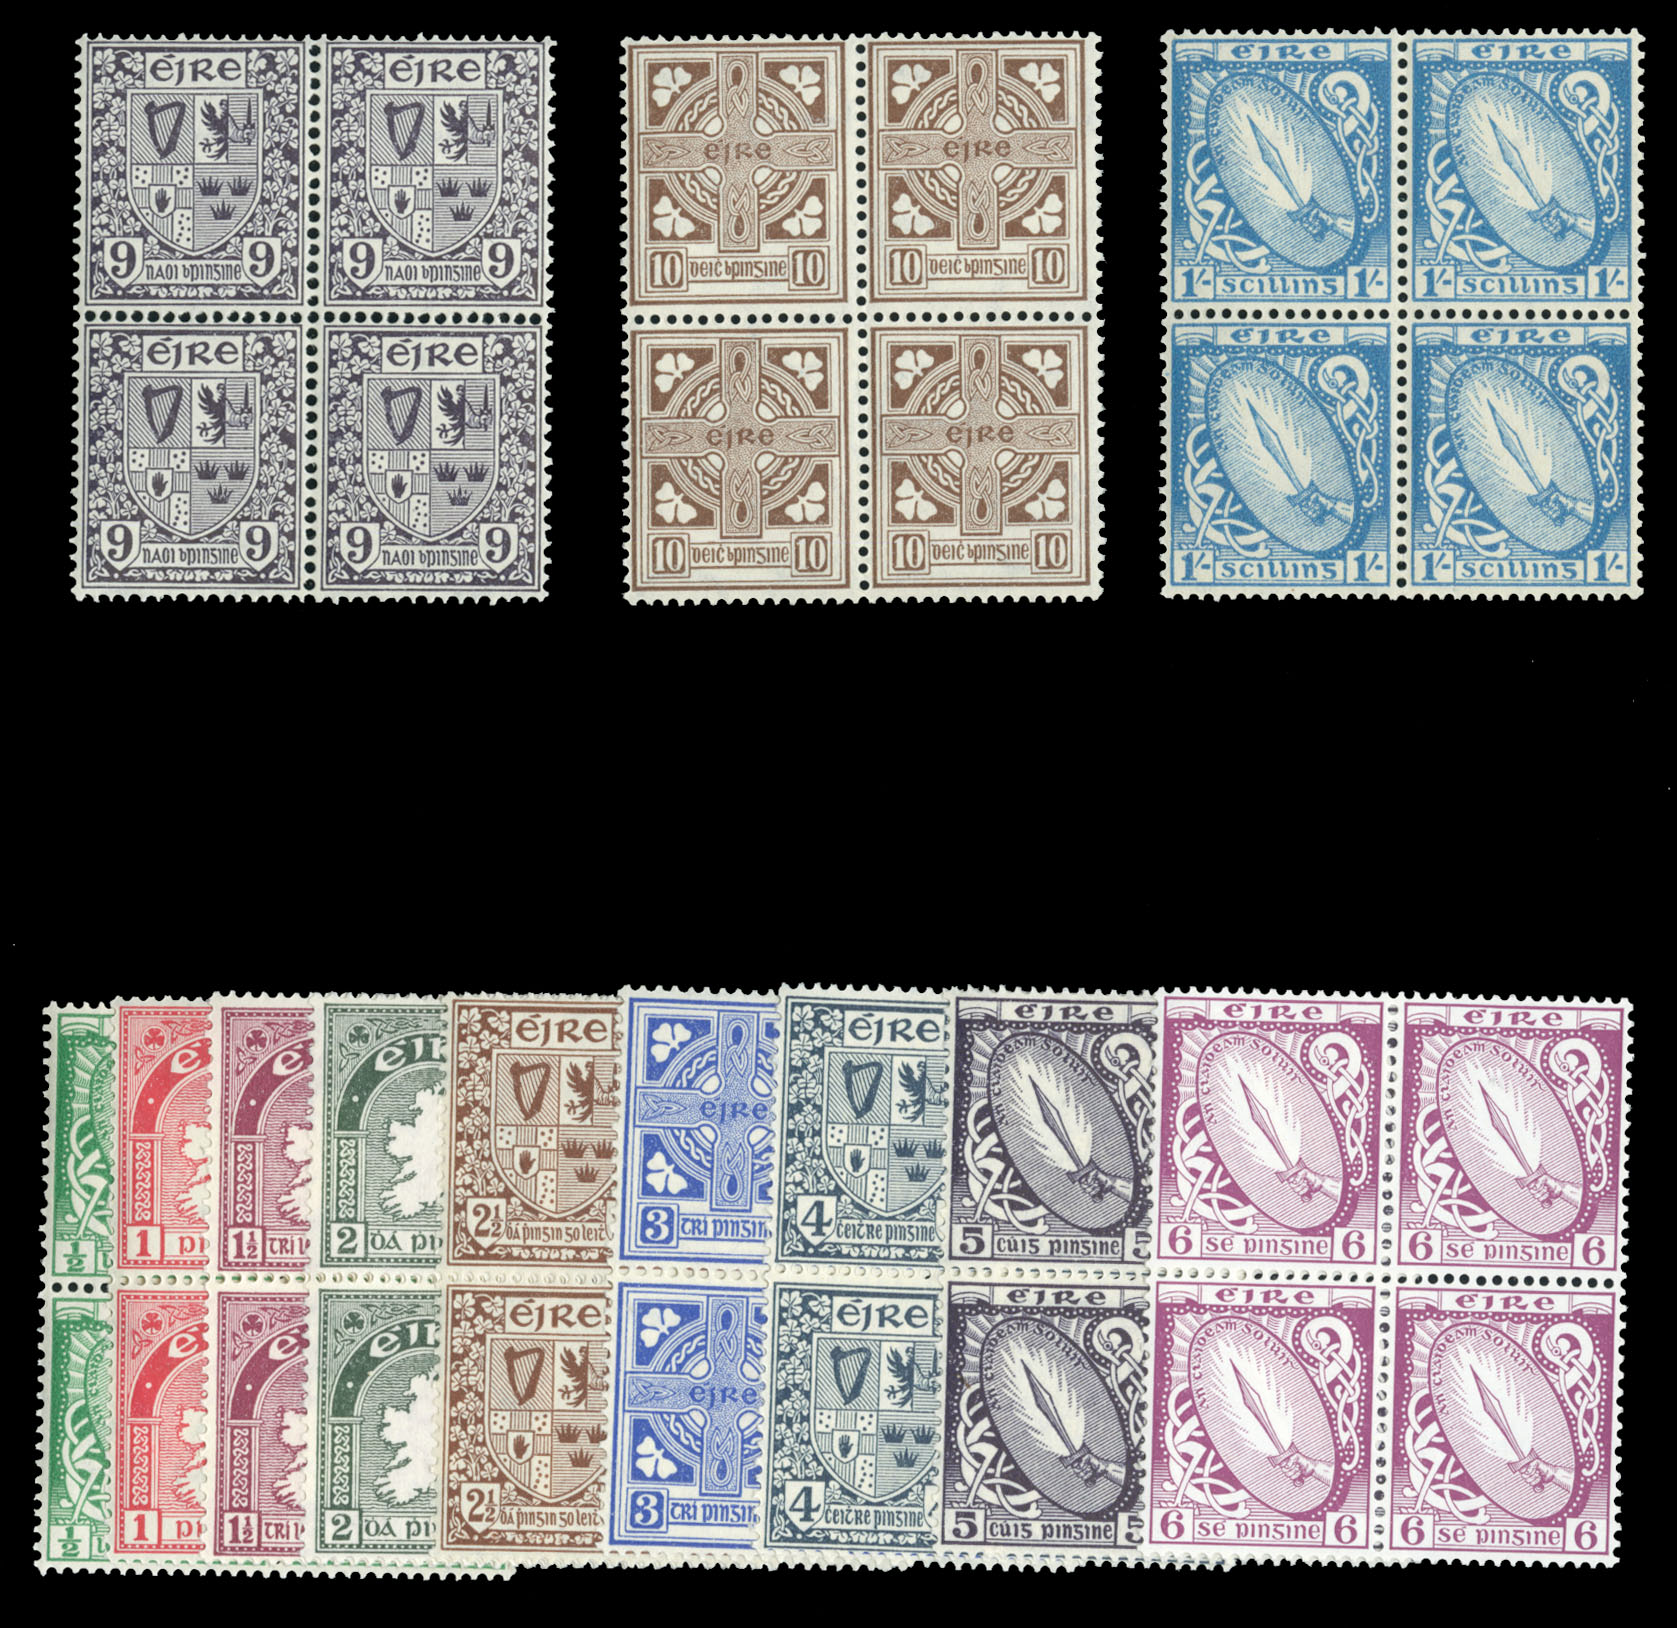 Lot 850 - ITALIAN STATES Modena  -  Cherrystone Auctions Worldwide Rare Stamps and Postal History